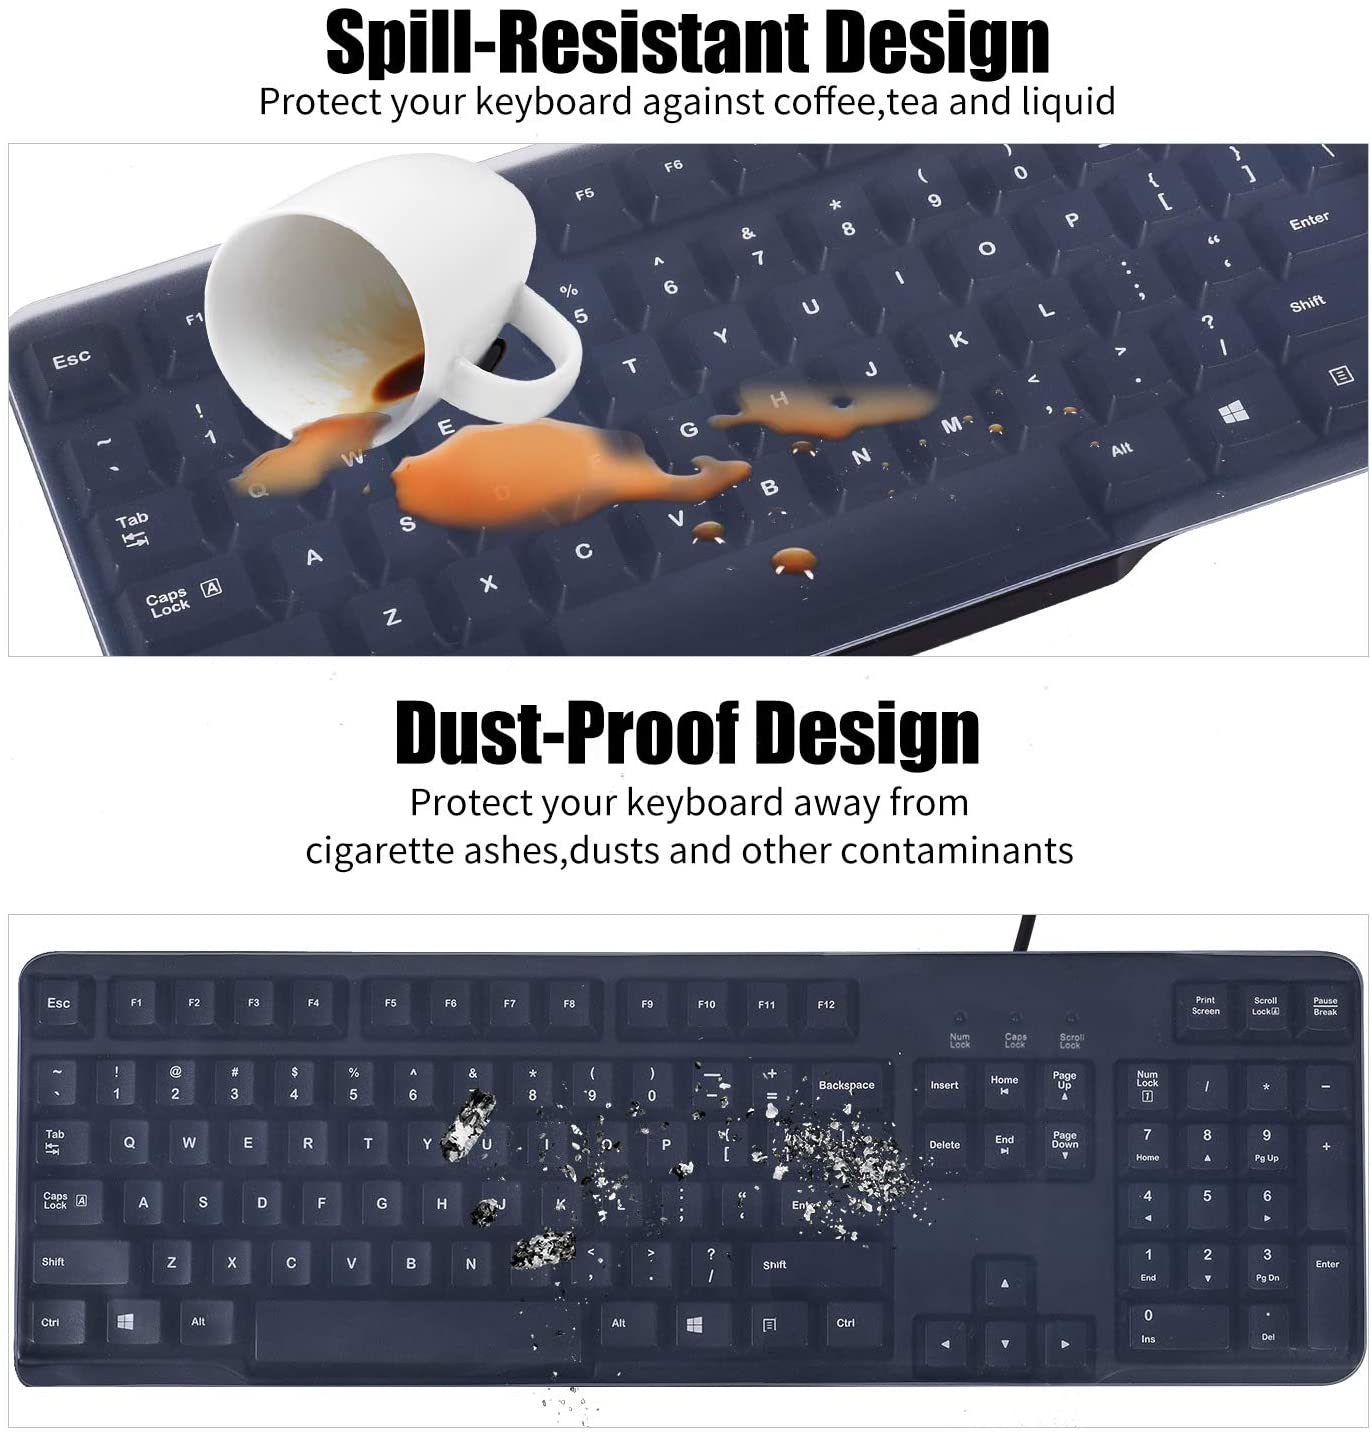 Universal Clear Waterproof Anti-Dust Silicone Keyboard Protector Cover Skin for Standard Size PC Computer Desktop Keyboards (Size: 17.52" x 5.51") - (For 12 piece(s))